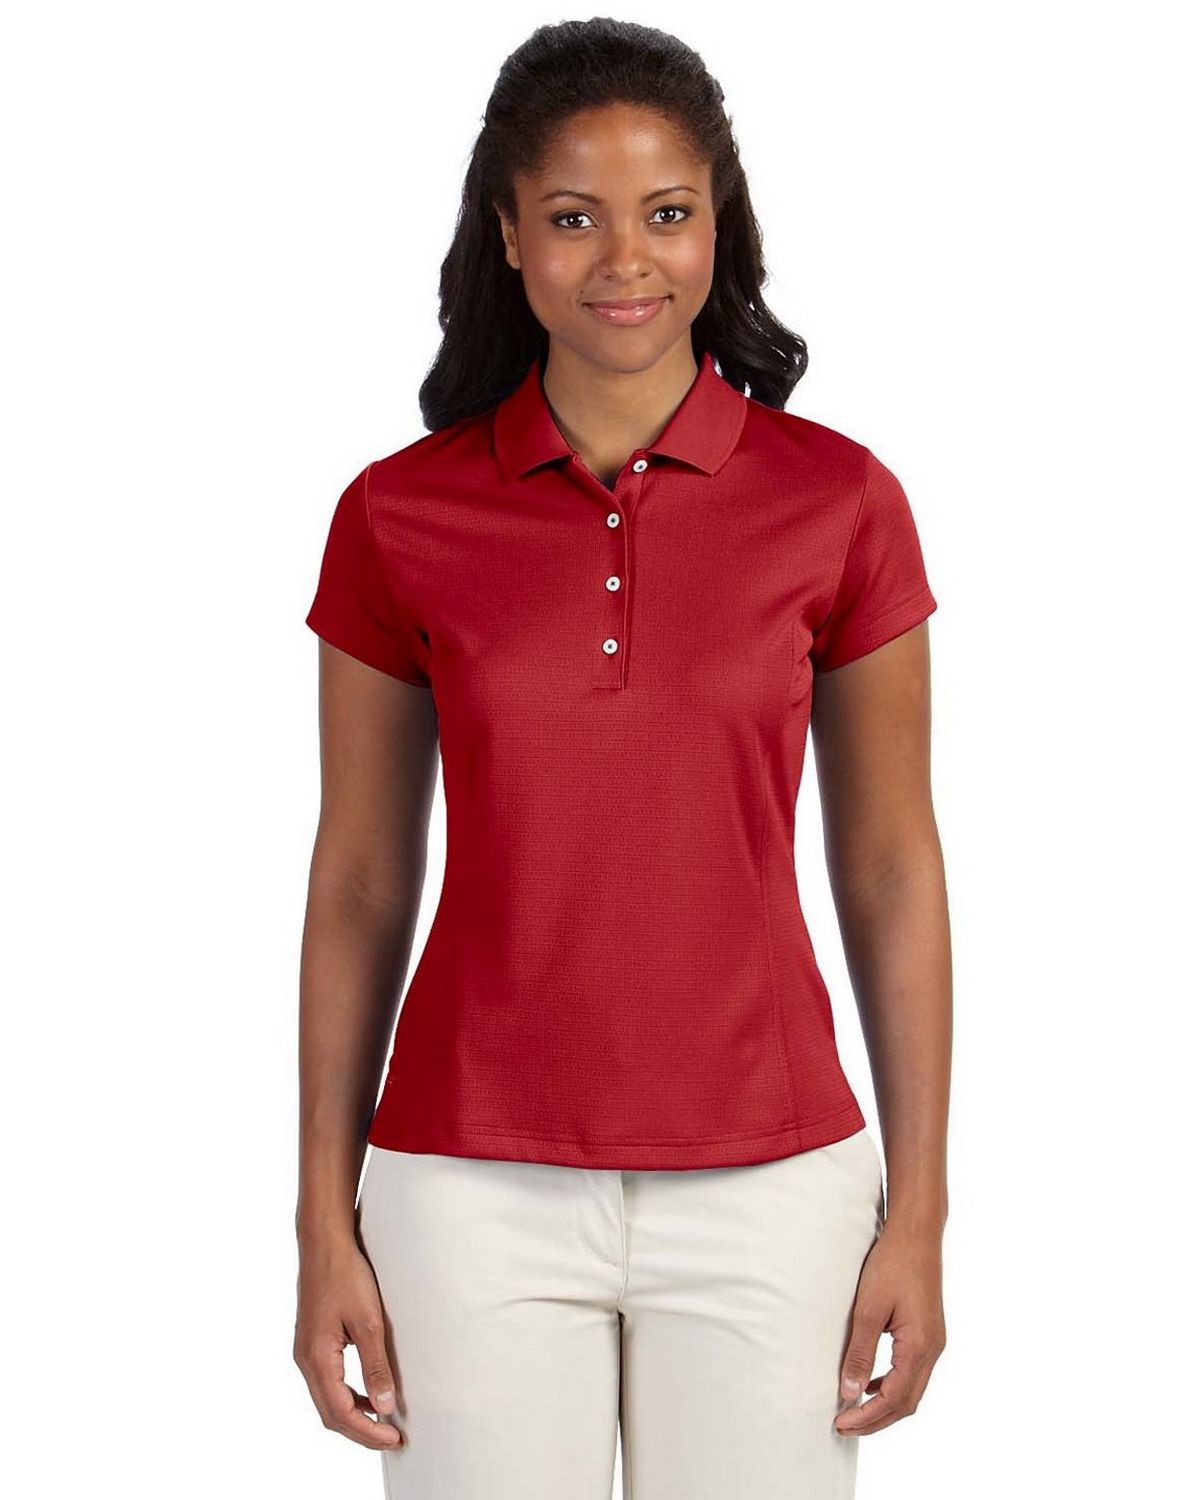 Adidas Golf A171 Ladies ClimaLite Solid Polo